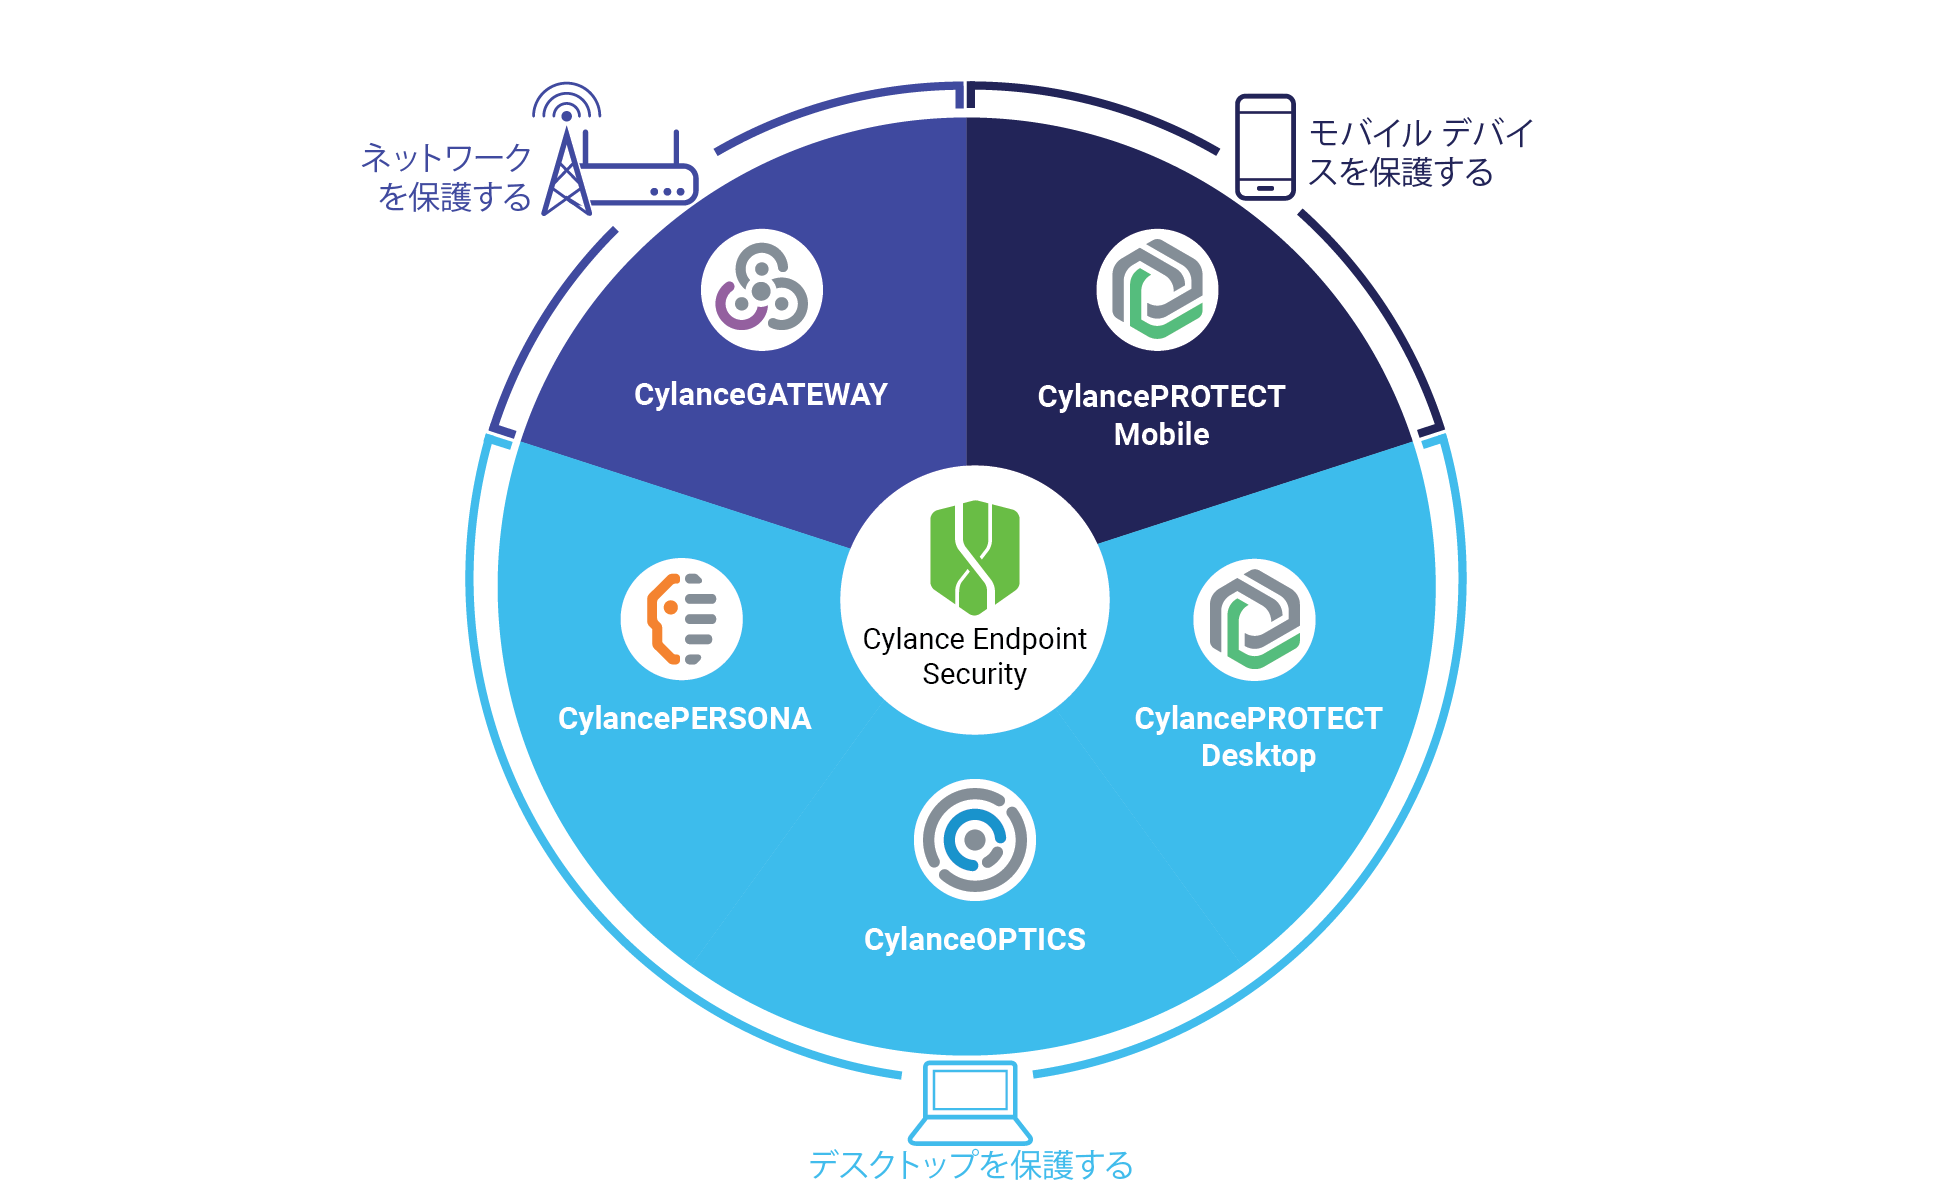 The pillars of the Cylance Endpoint Security platform excluding Avert 